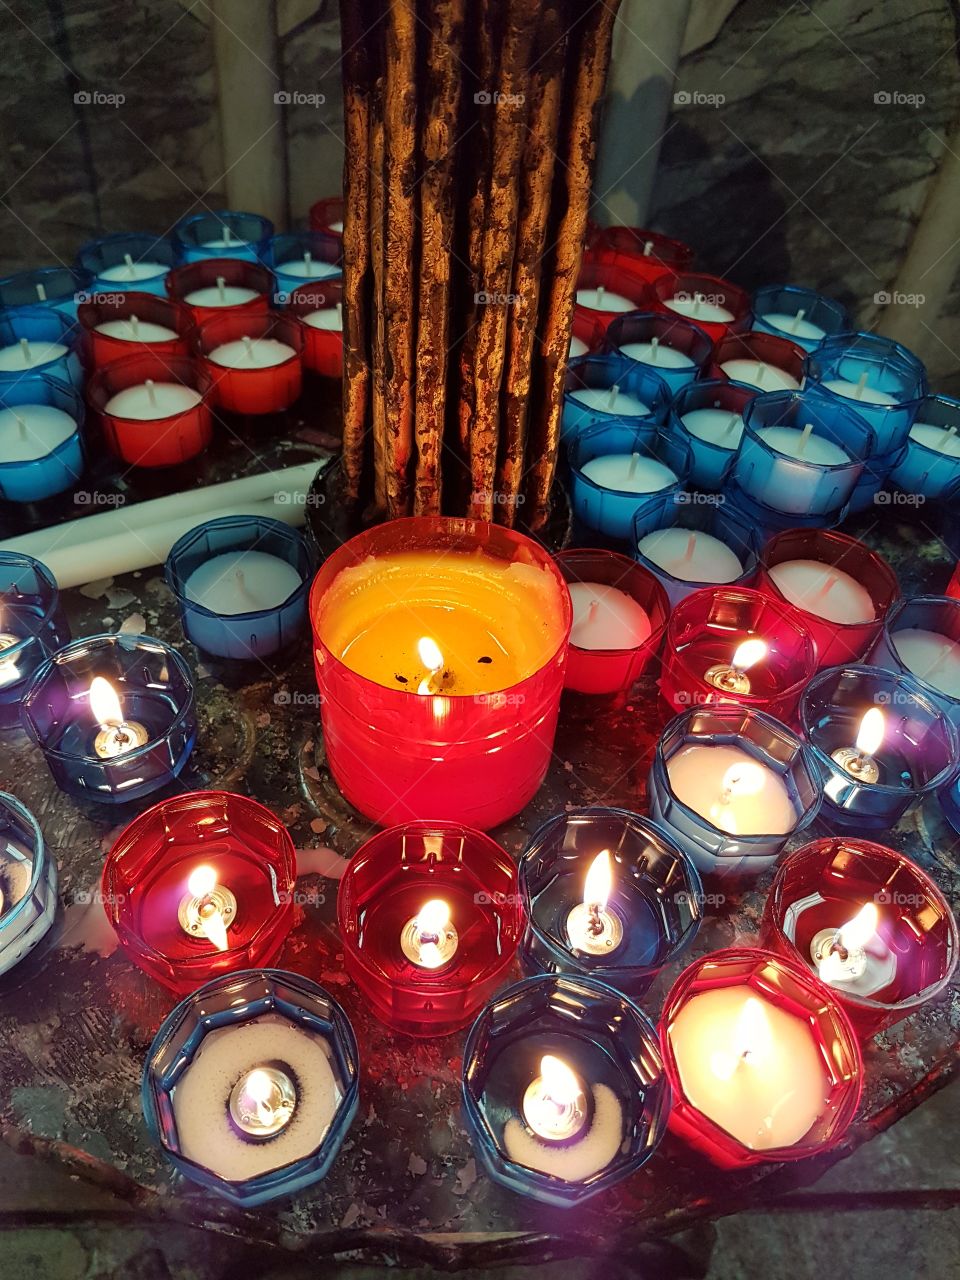 Lighted candles in a church interior, red and blue colors